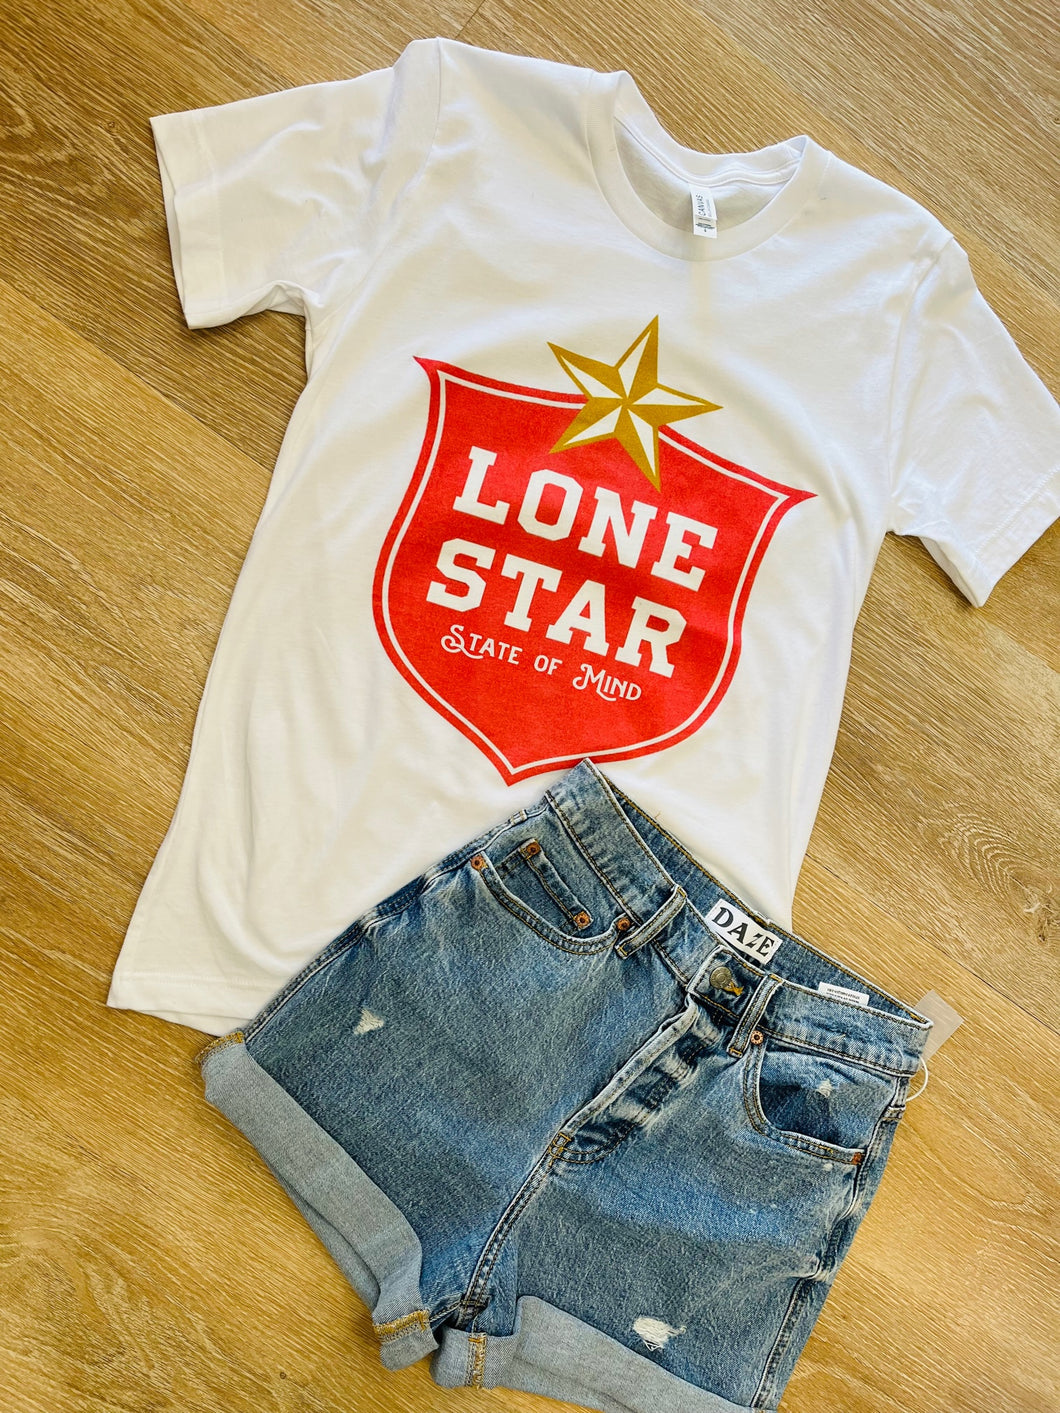 Lone Star State of Mind Tee